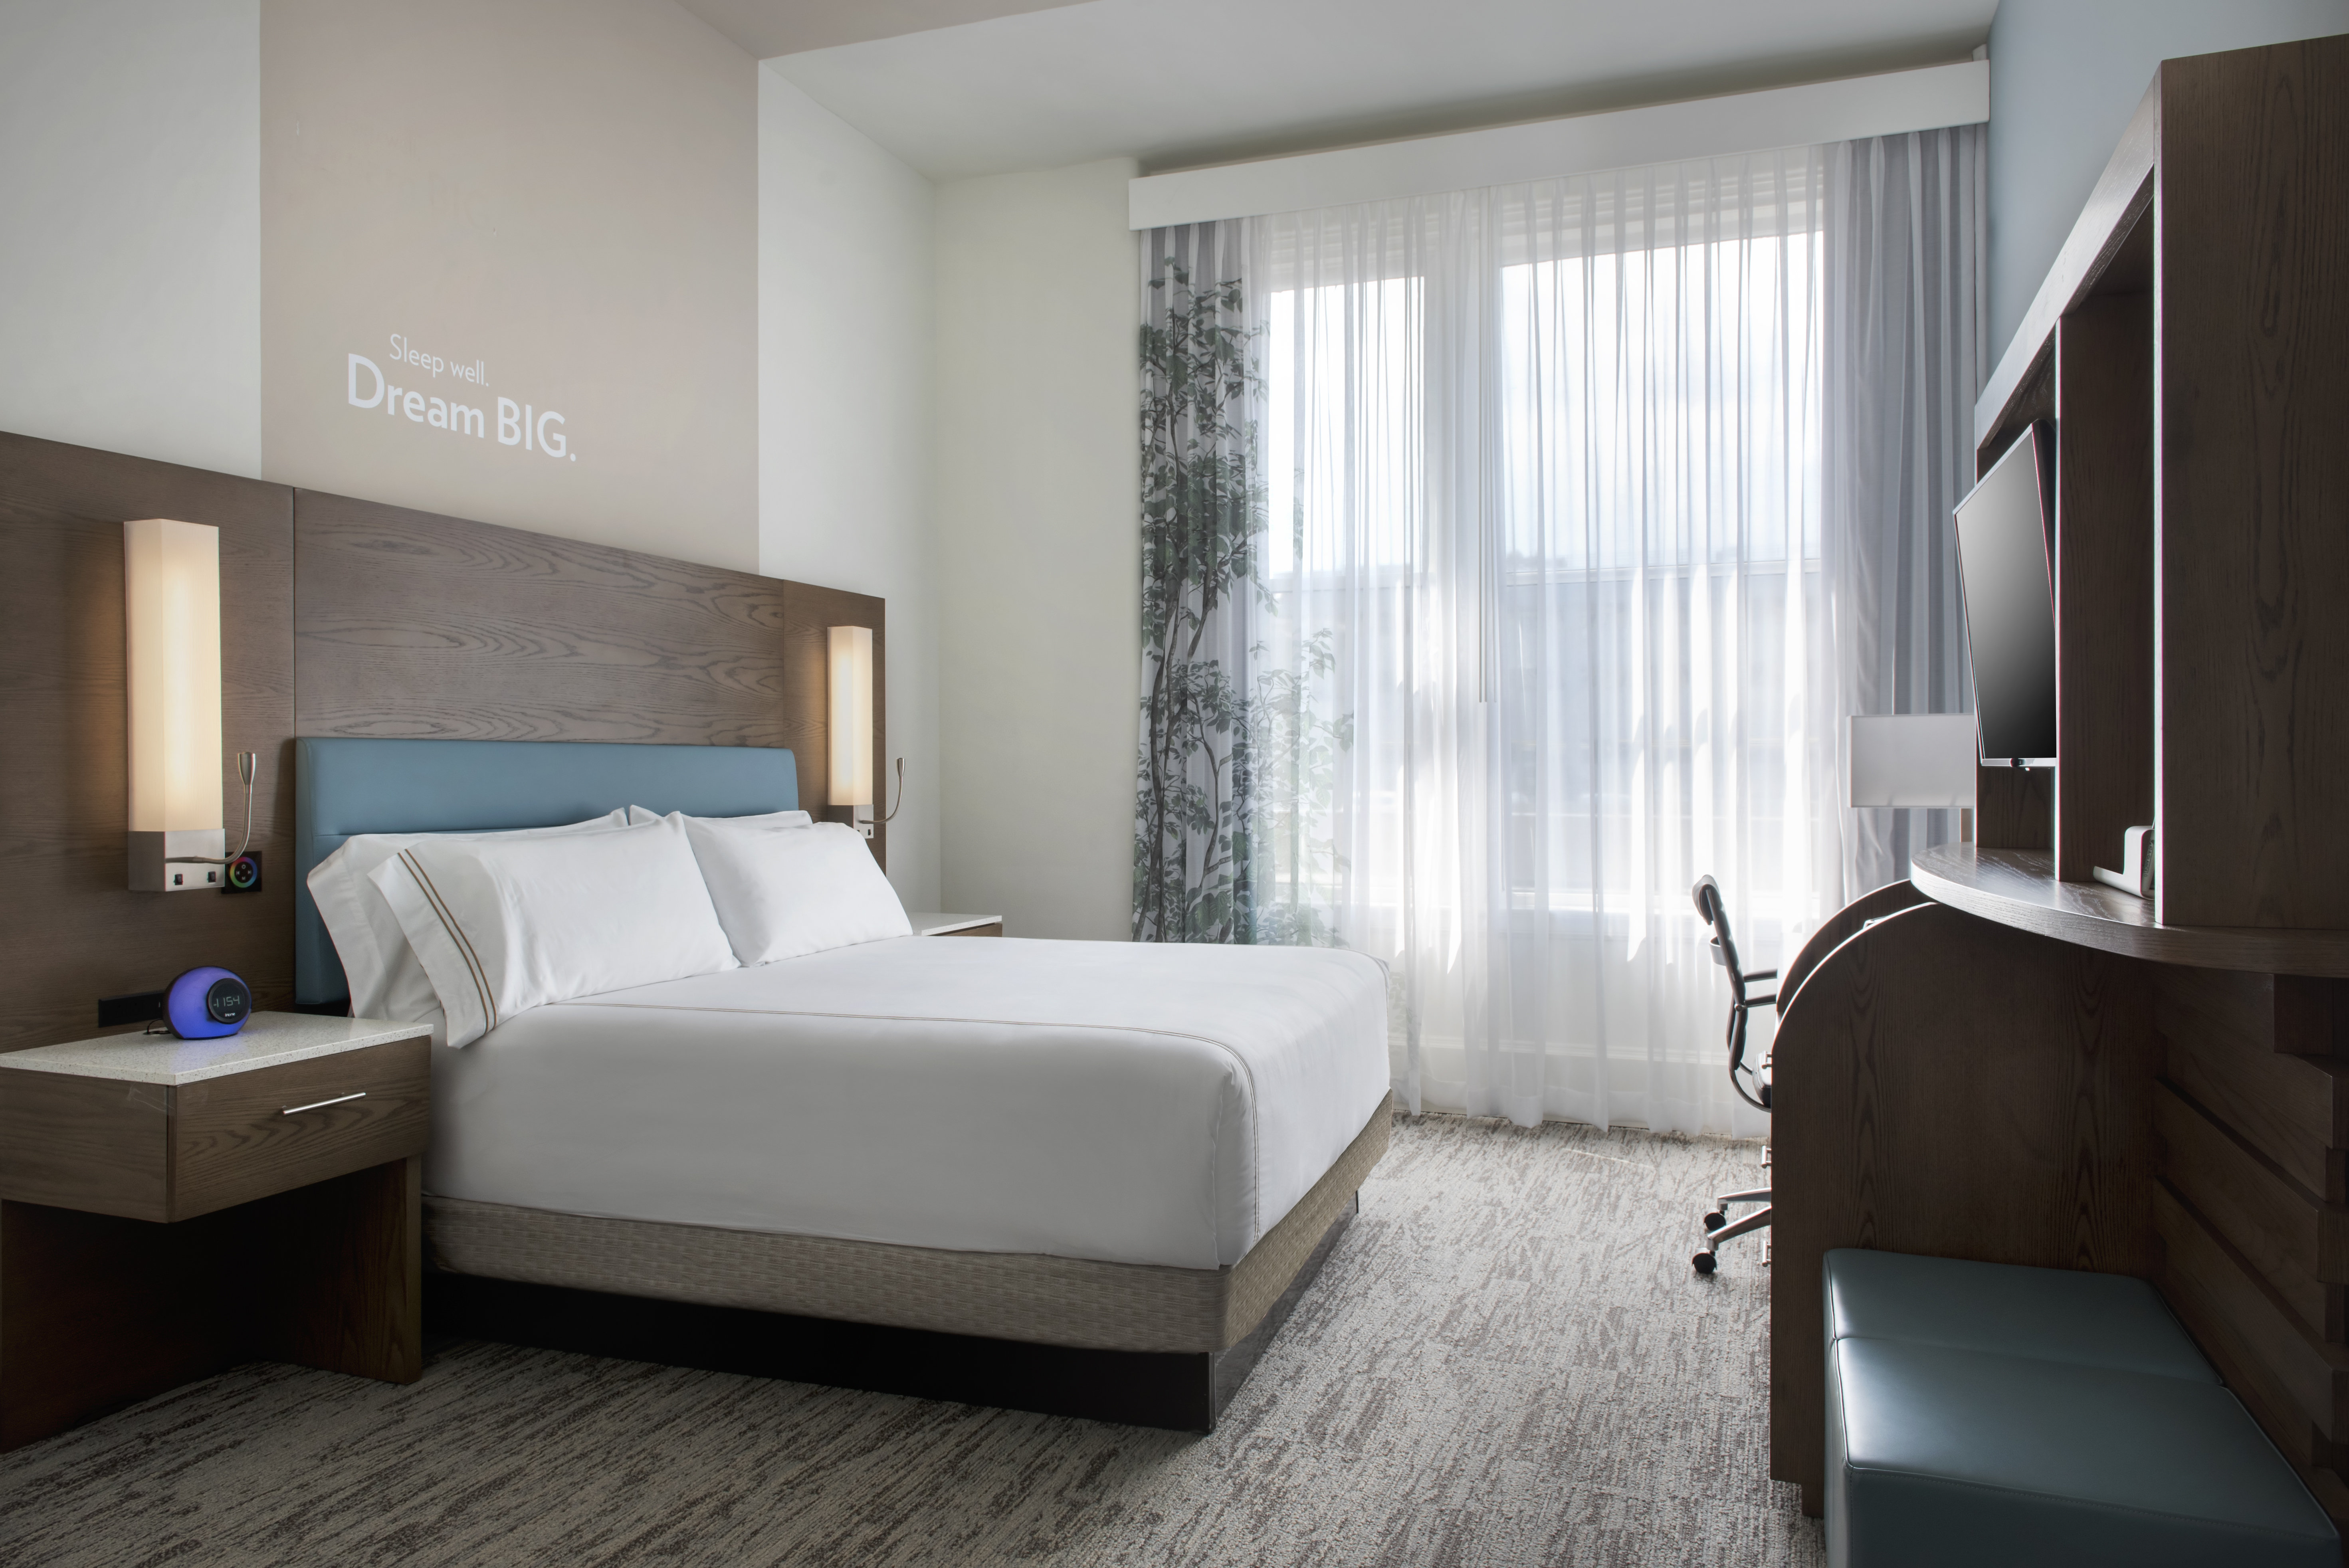 Our hotel in downtown Pittsburgh features spacious guest rooms.